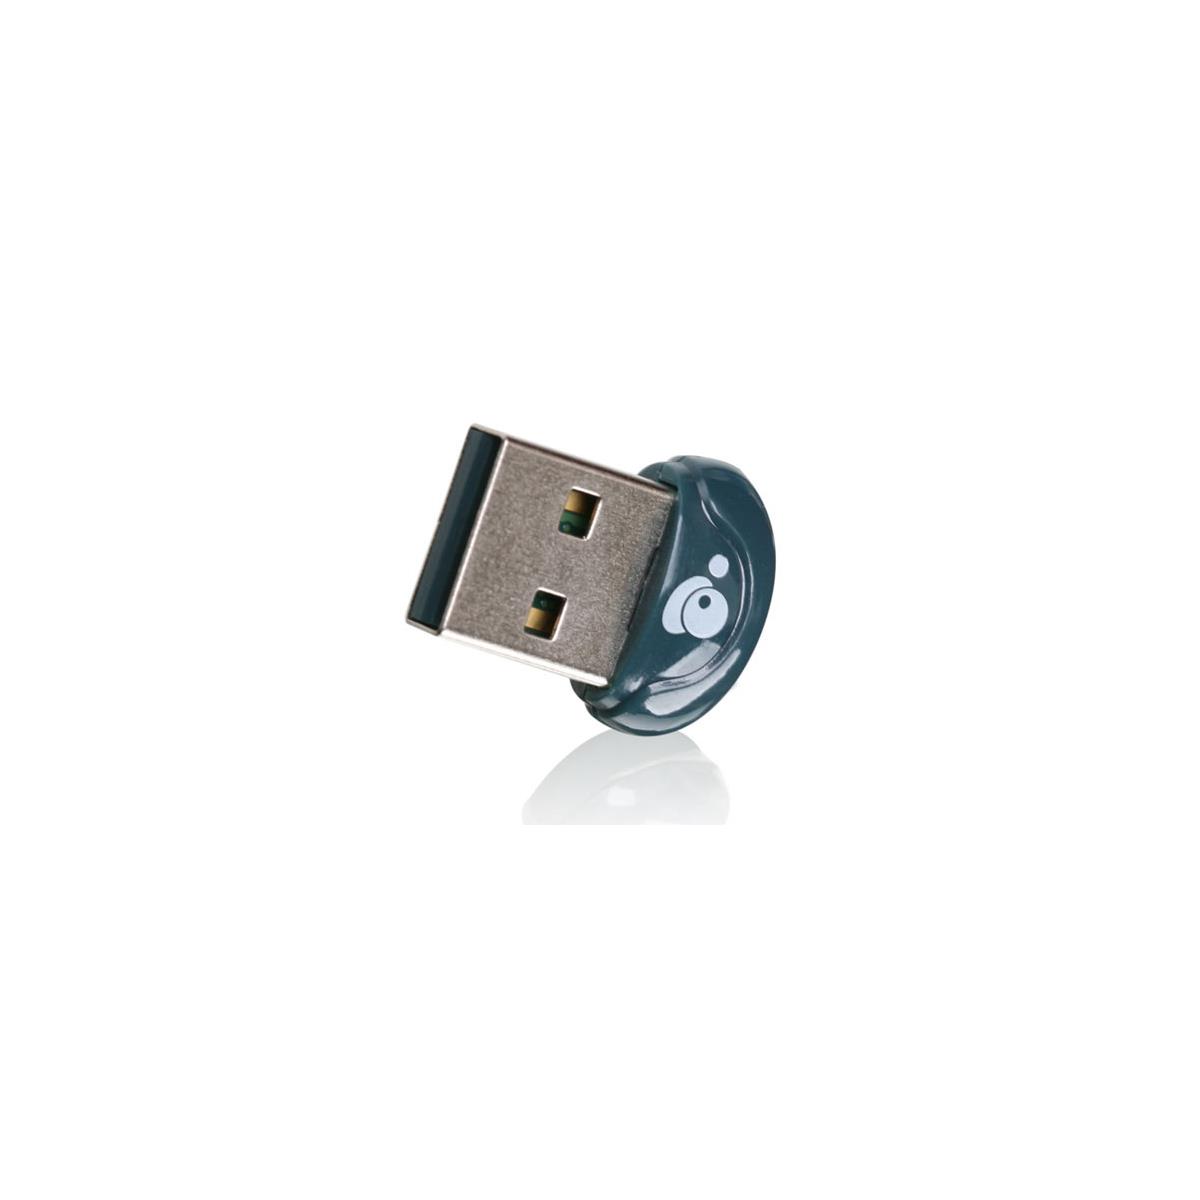 

IOGEAR Bluetooth 4.0 USB Micro Adapter, 2.4GHz - 2.4835GHz ISM Frequency Band